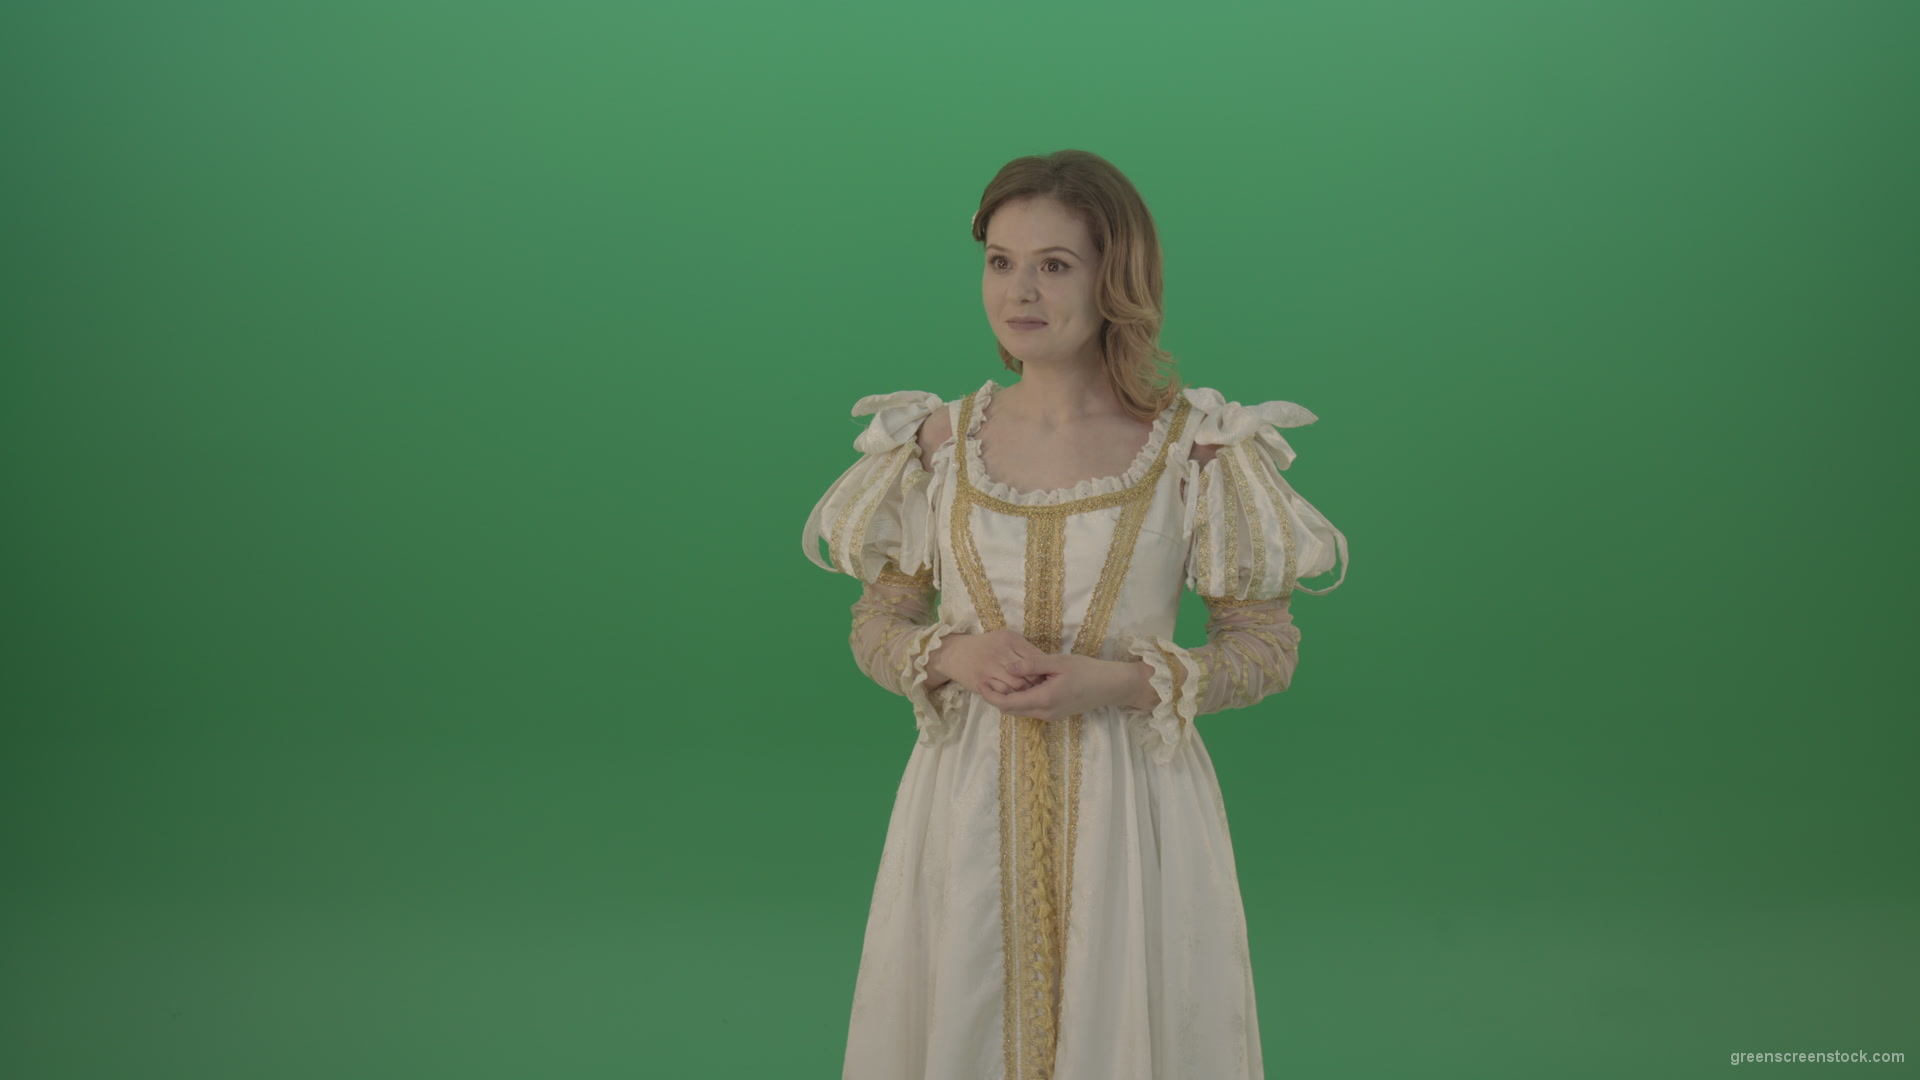 Medieval-girl-in-a-white-suit-looking-far-away-isolated-on-green-background_006 Green Screen Stock